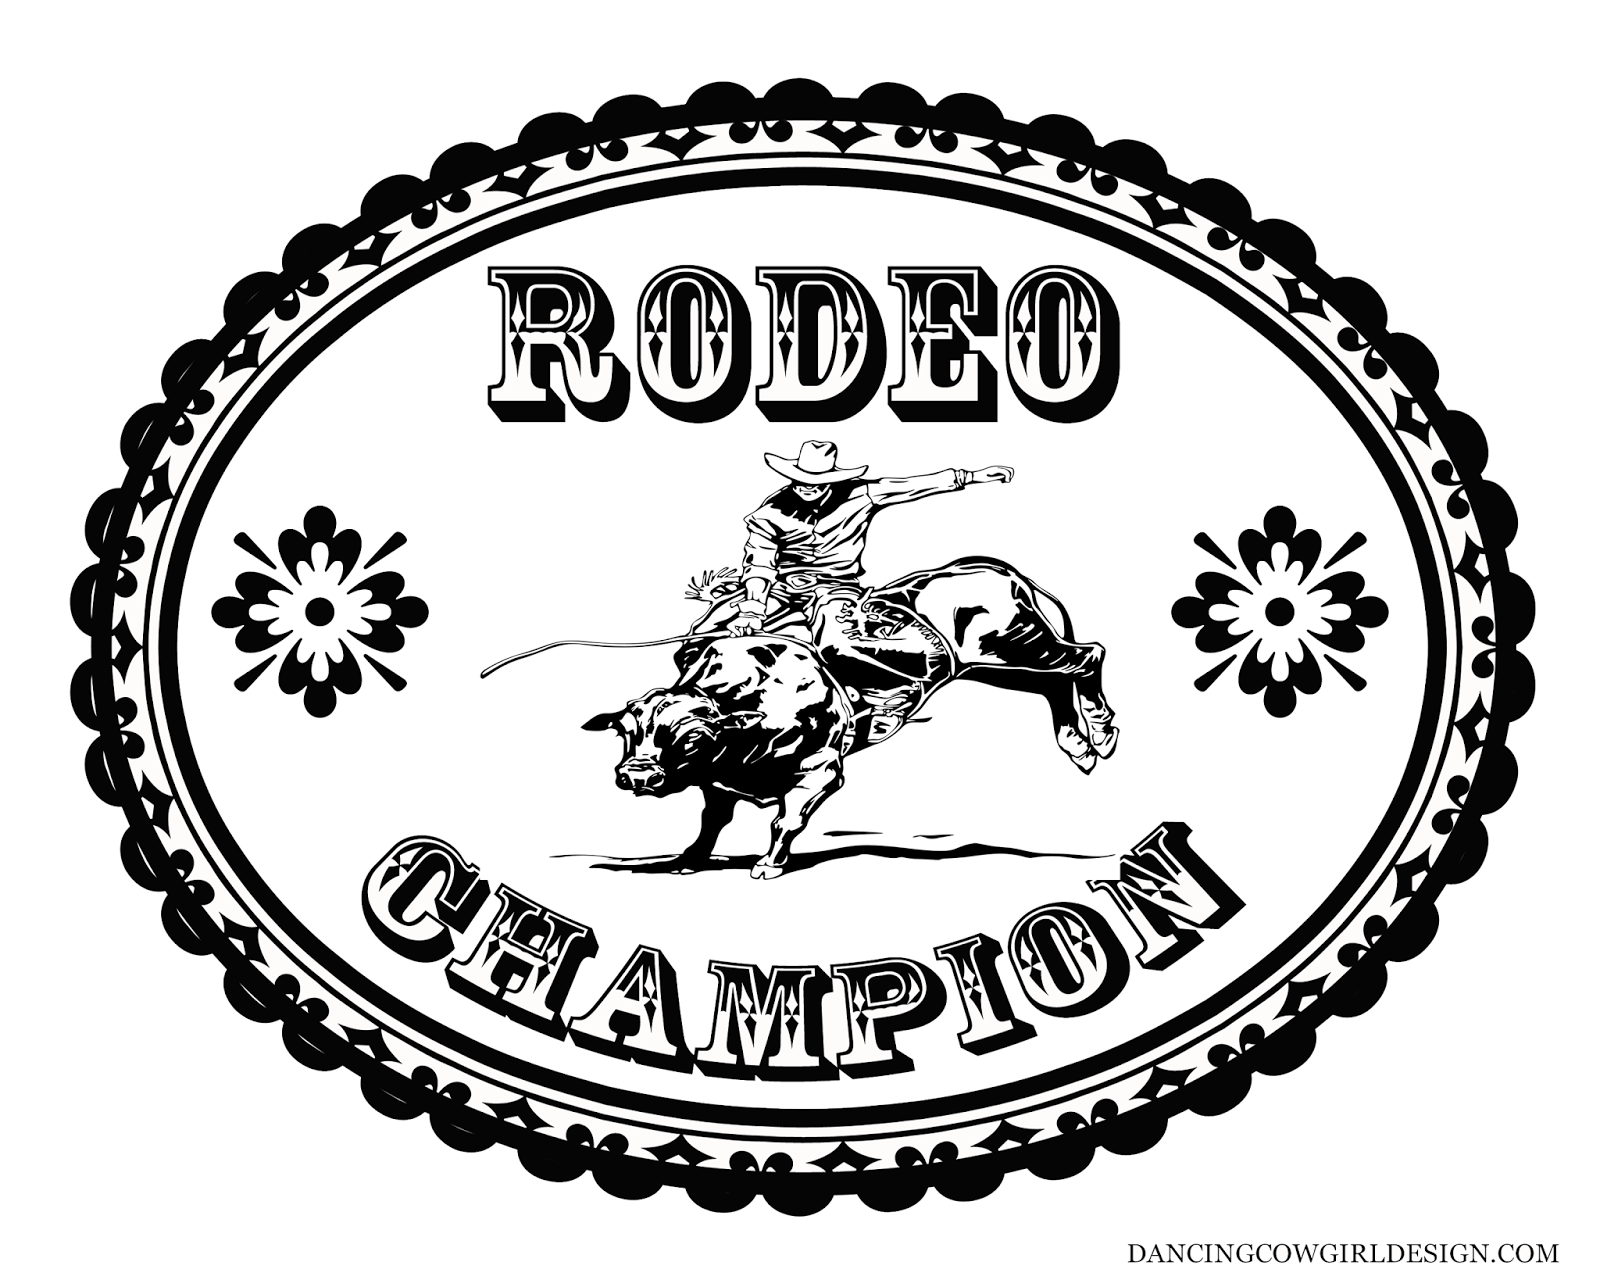 RODEO COLORING PAGES: Coloring Sheet Cowboy Rodeo Bull Rider.